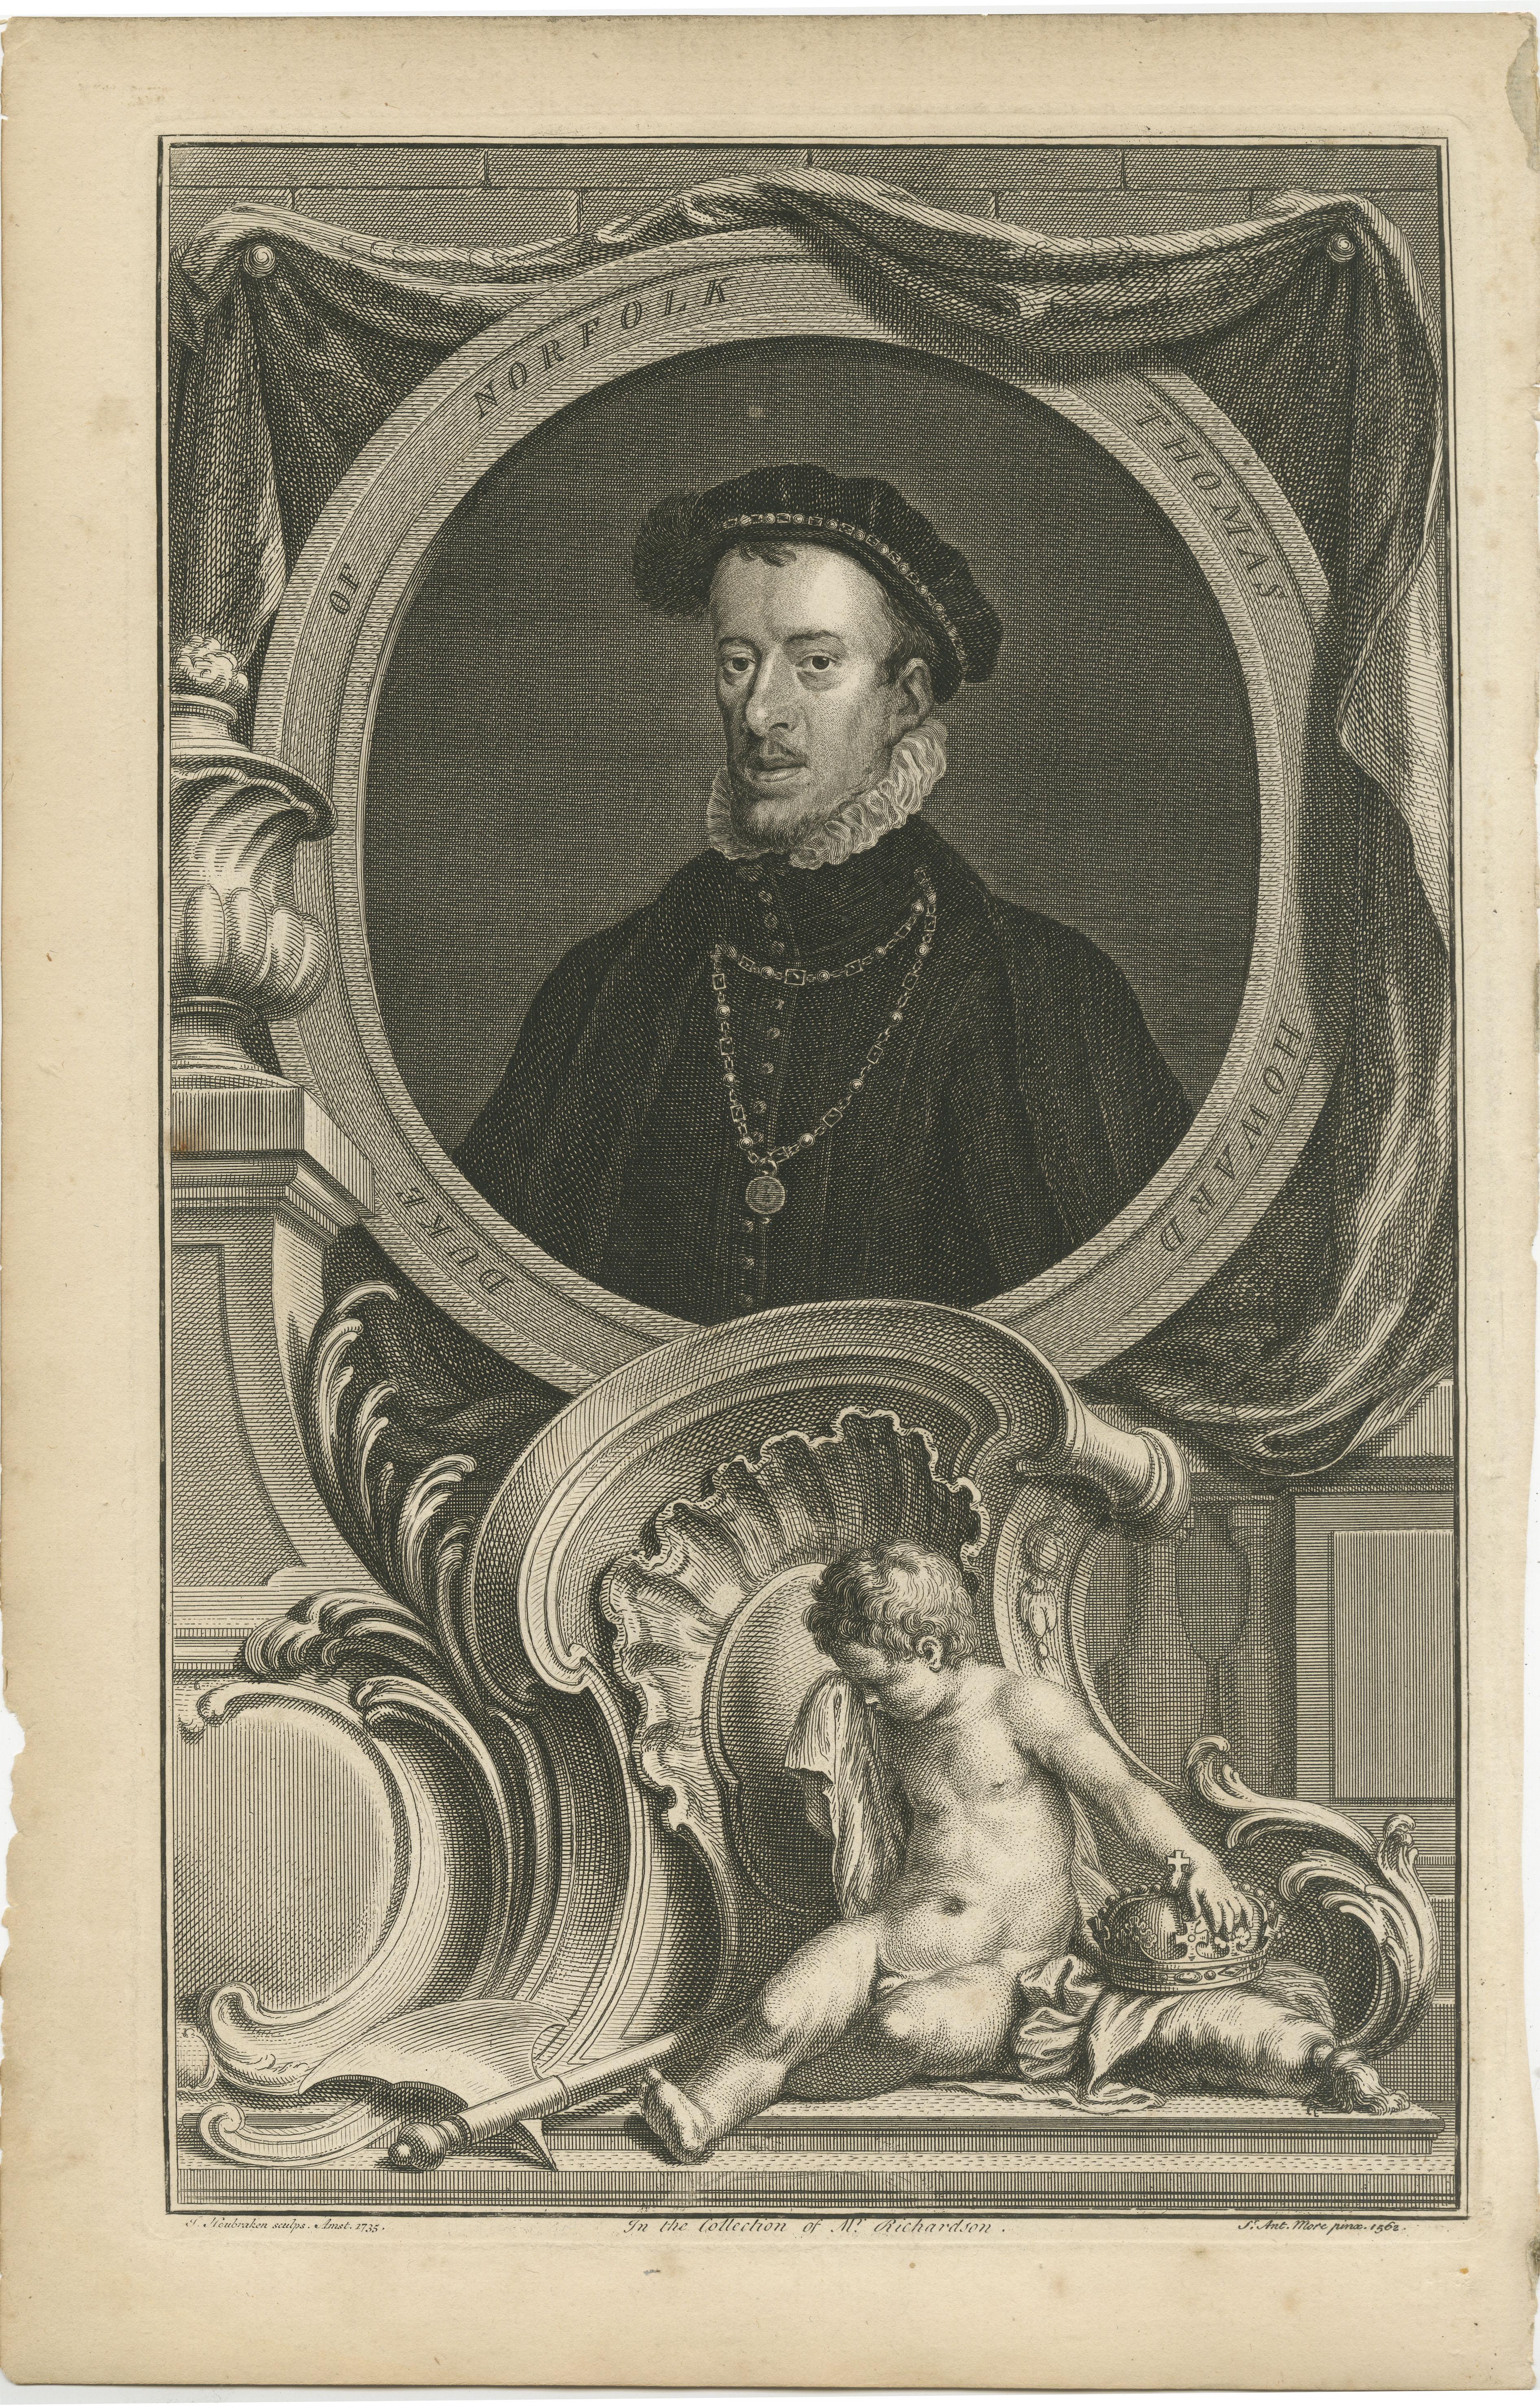 Antique portrait titled 'Duke of Norfolk Thomas Howard'. Thomas Howard, 4th Duke of Norfolk, KG (Kenninghall, Norfolk, 10 March 1536 – Tower Hill, London, 2 June 1572) was an English nobleman and politician.

This print originates from Thomas